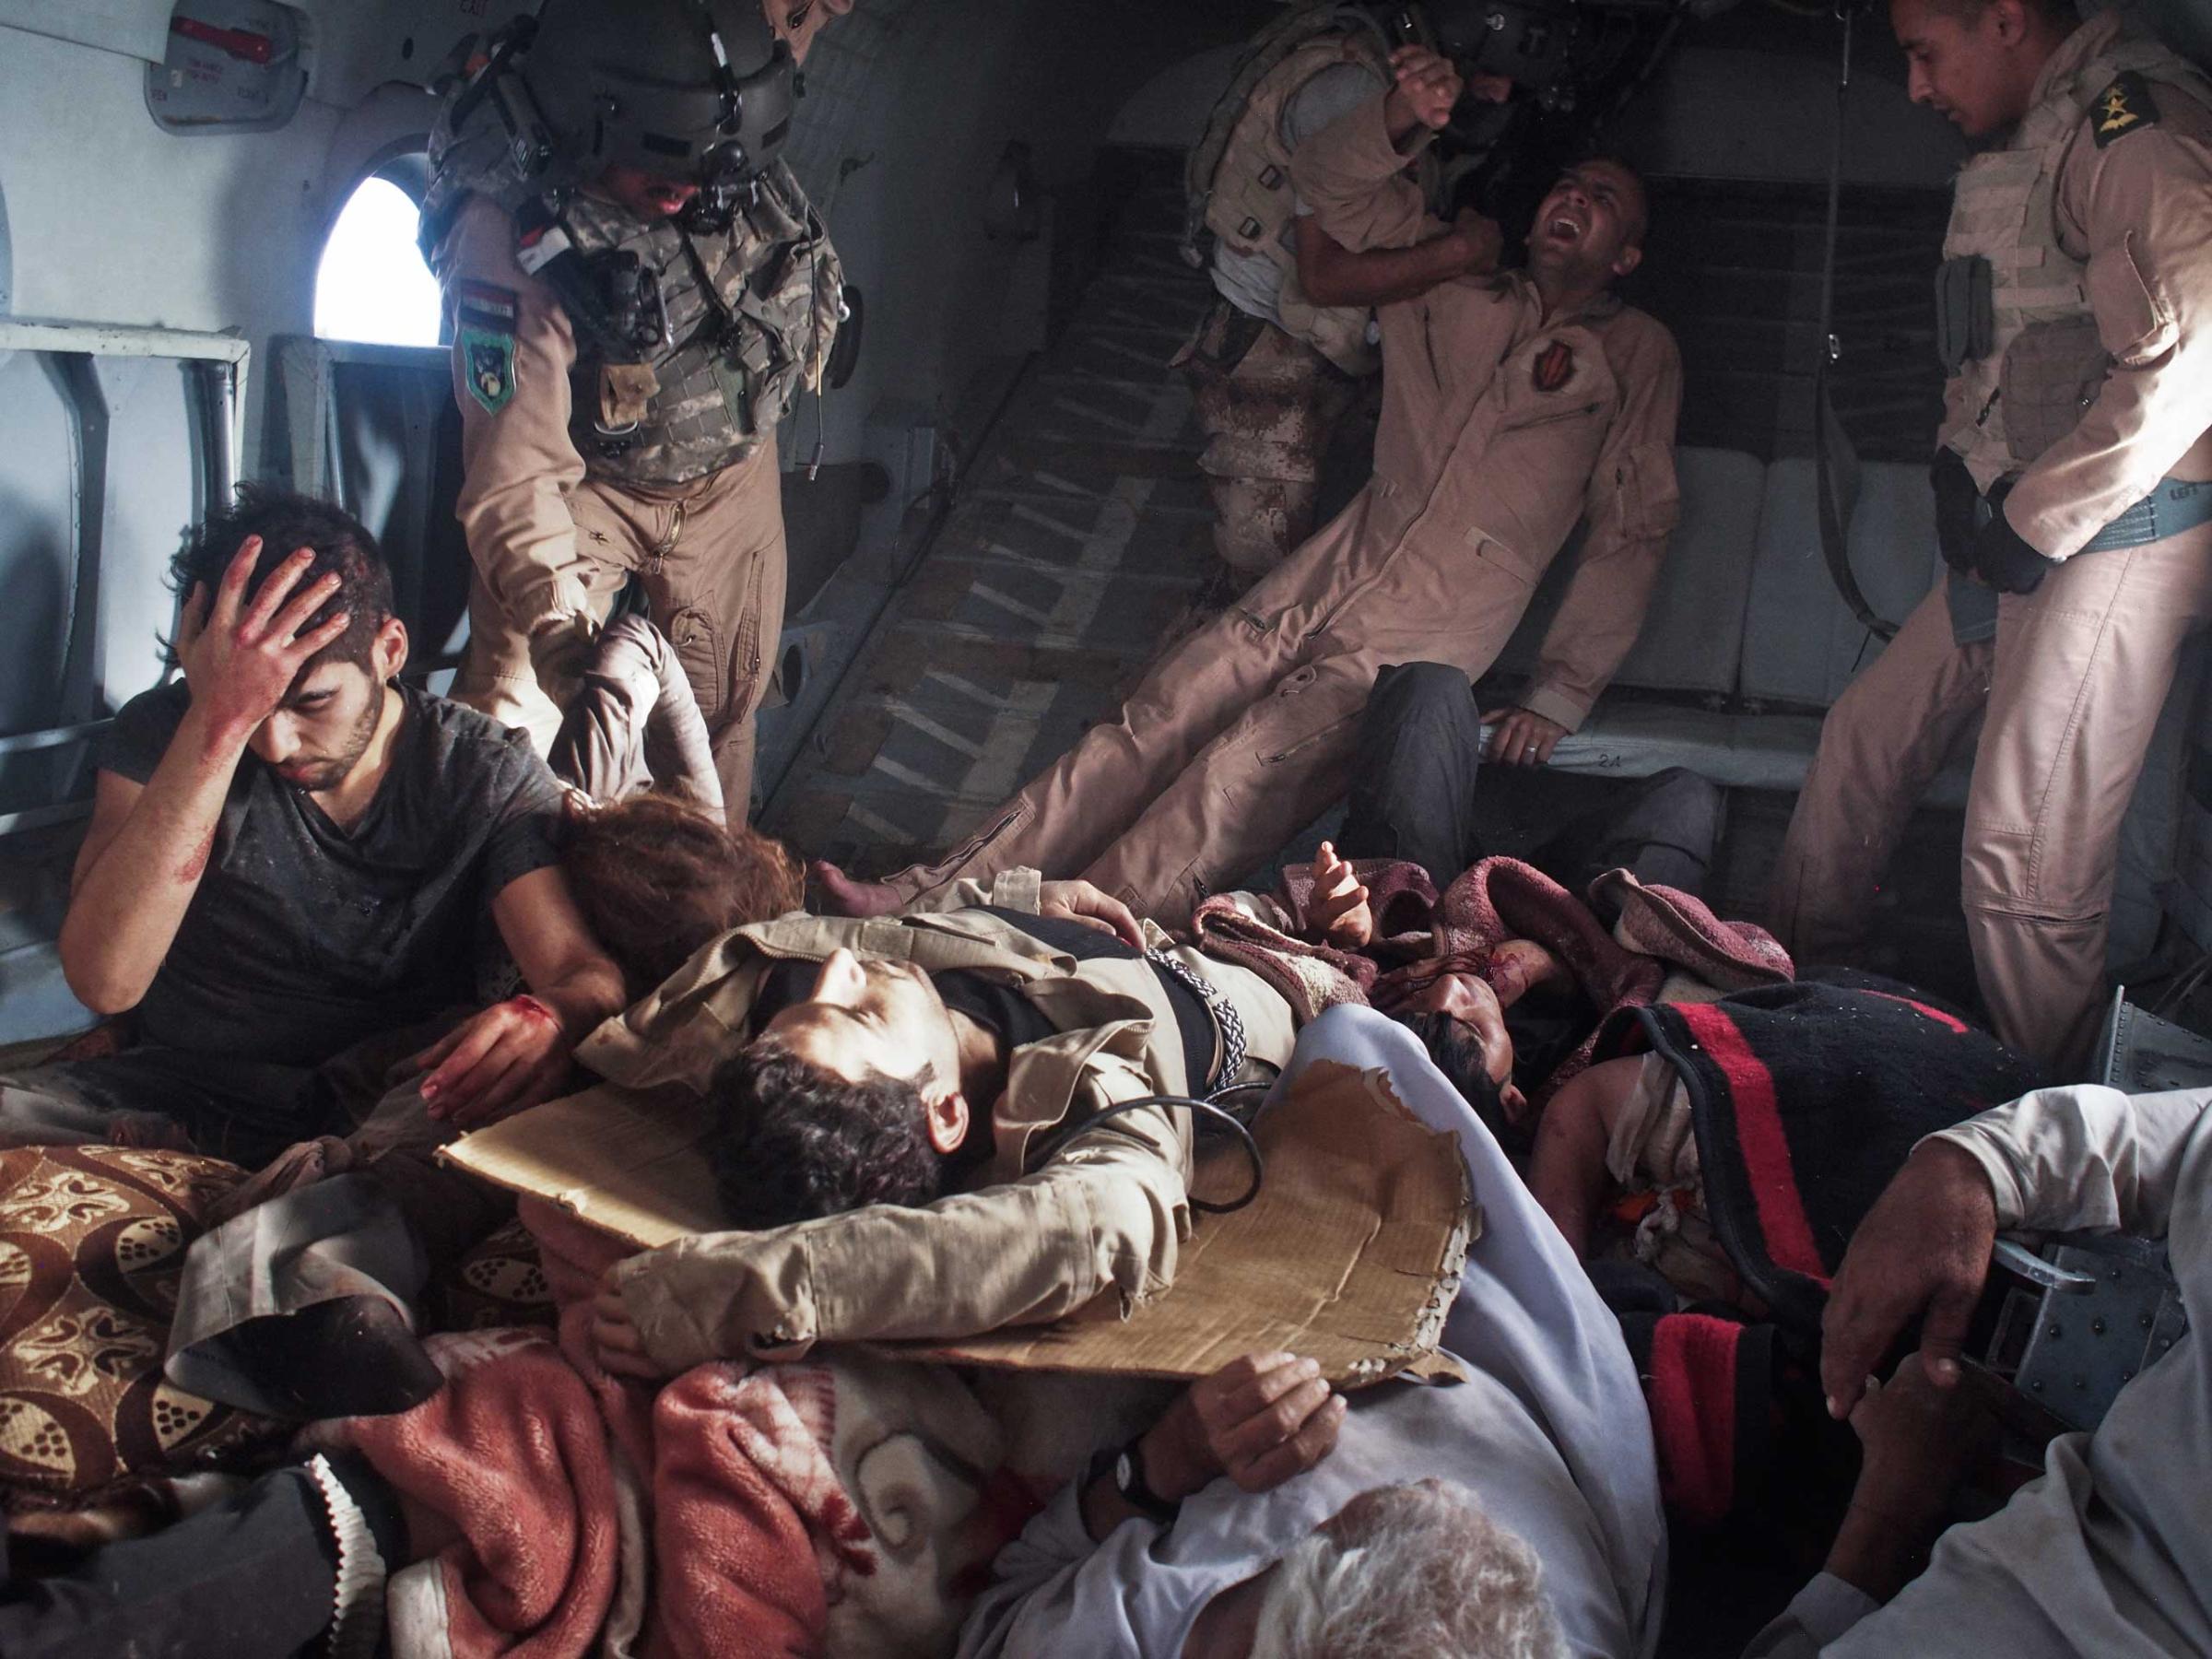 Survivors of the crash, including Yazidi refugees and Kurdish and Iraqi Army personnel, onboard a rescue helicopter that transported them from the crash site back to Kurdish-controlled Dohuk Province. Sinjar Mountains, Iraq, Aug. 12, 2014.